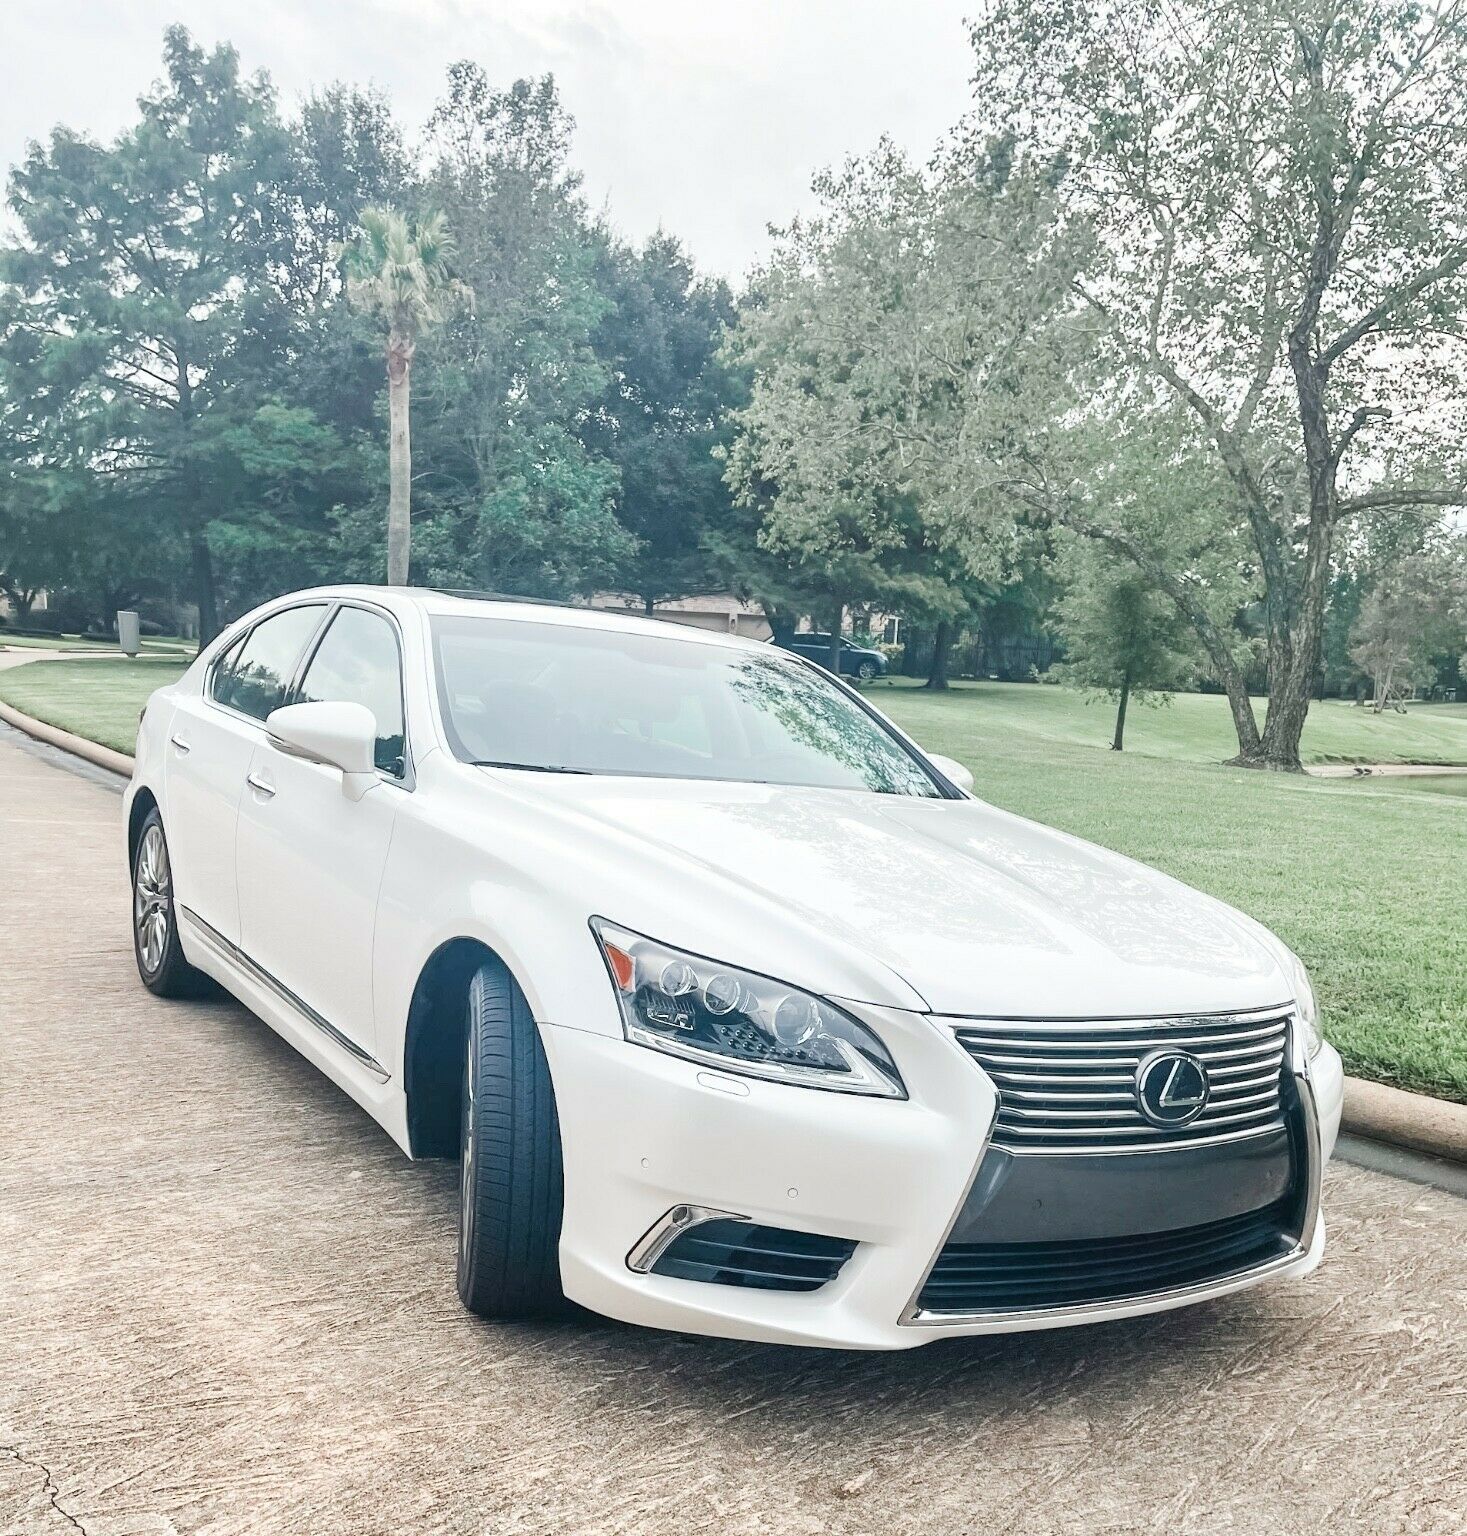 2017 Lexus Ls460 460 Excellent!! Condition. Very Unique Interior Color Limited Number Made